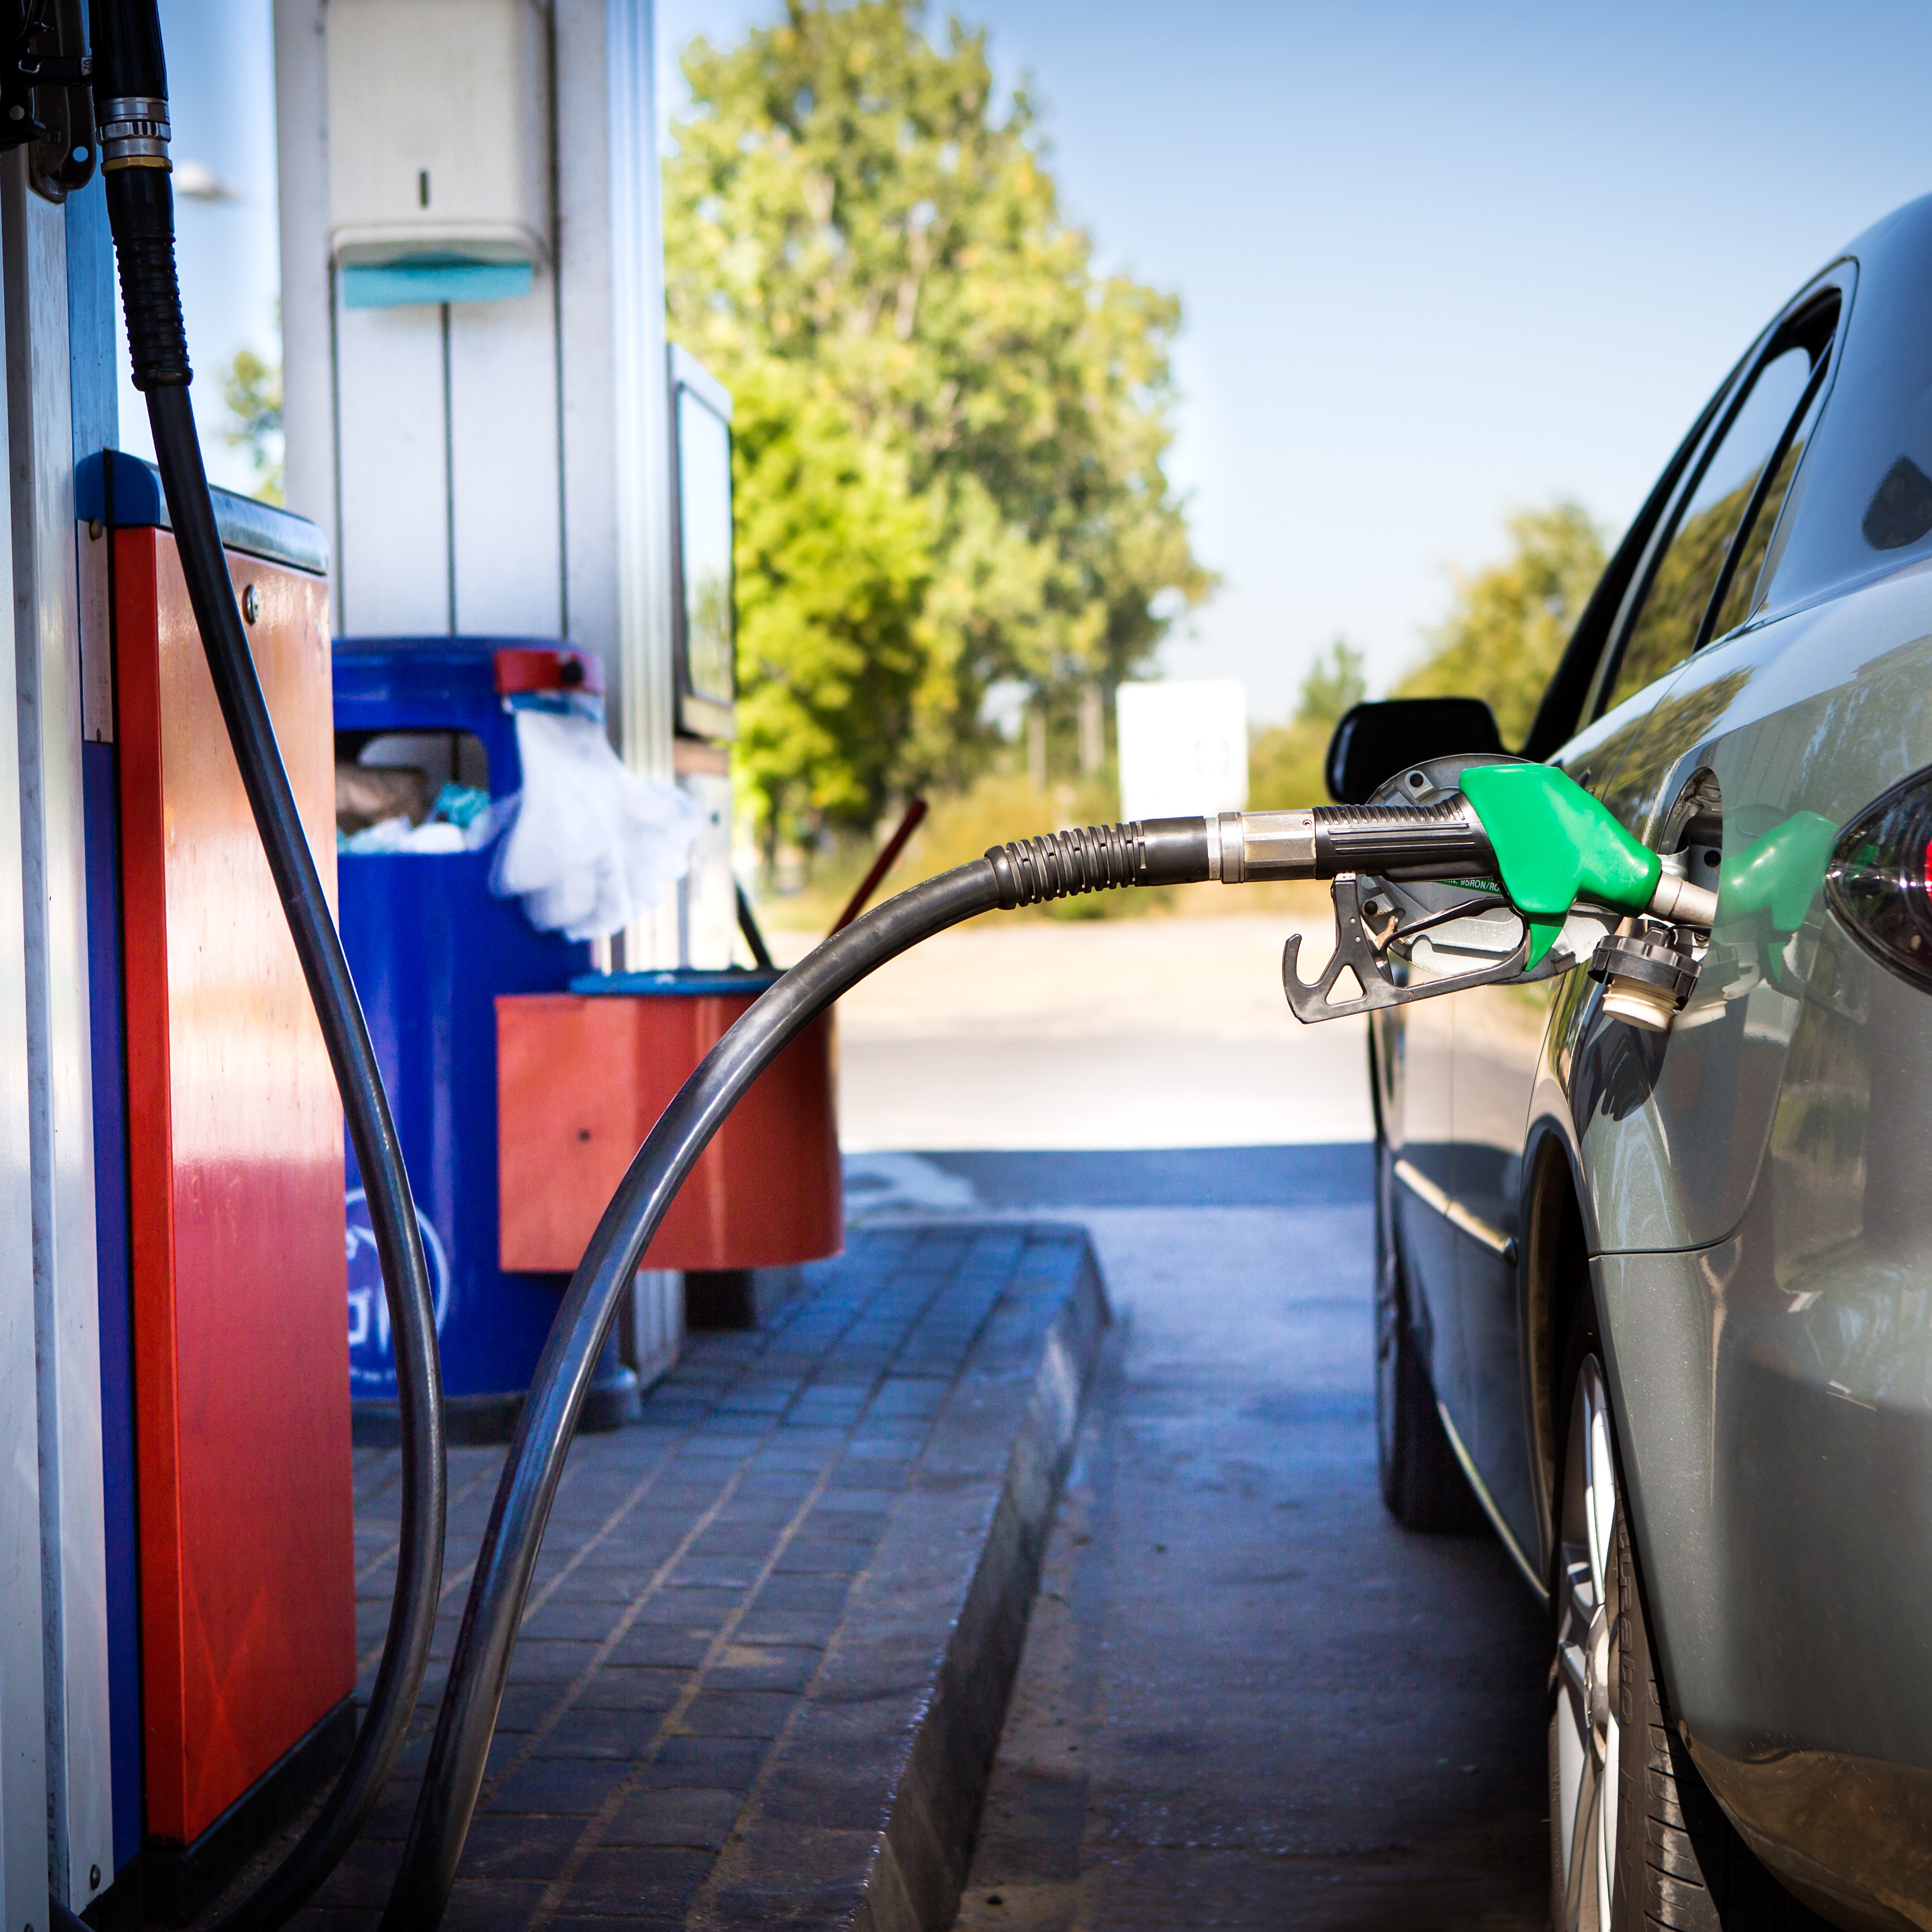 Demand is robust, but pump prices stay down thanks to rising supply levels